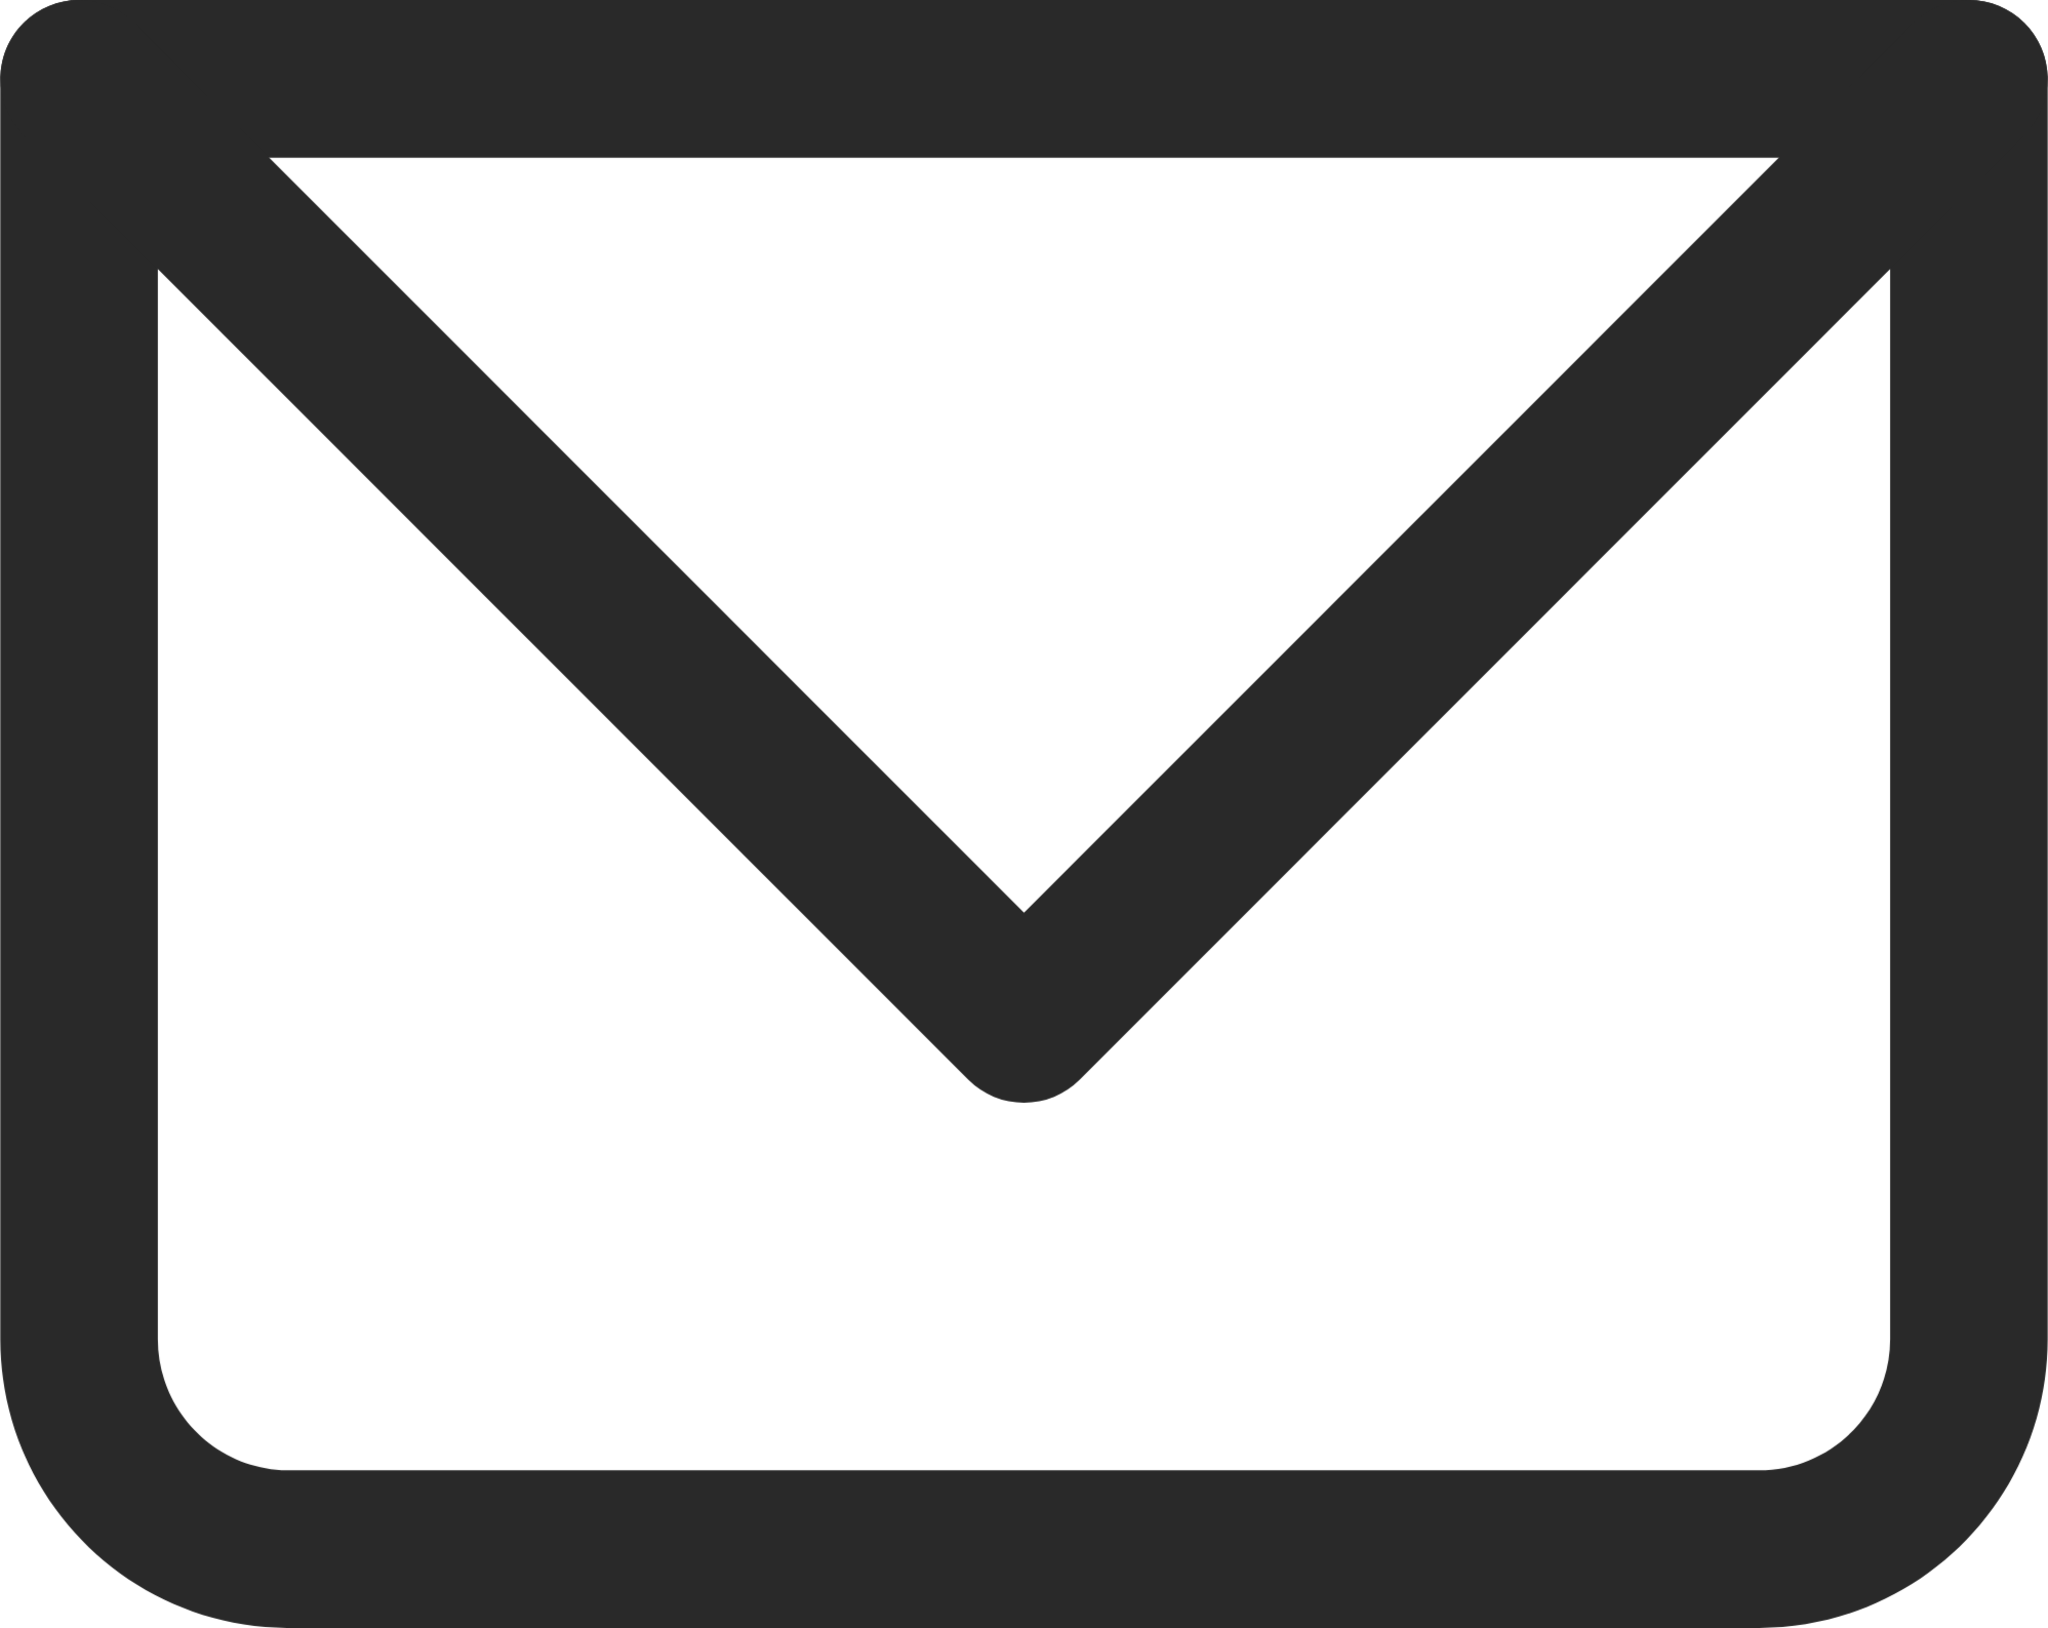 email" Icon - Download for free – Iconduck